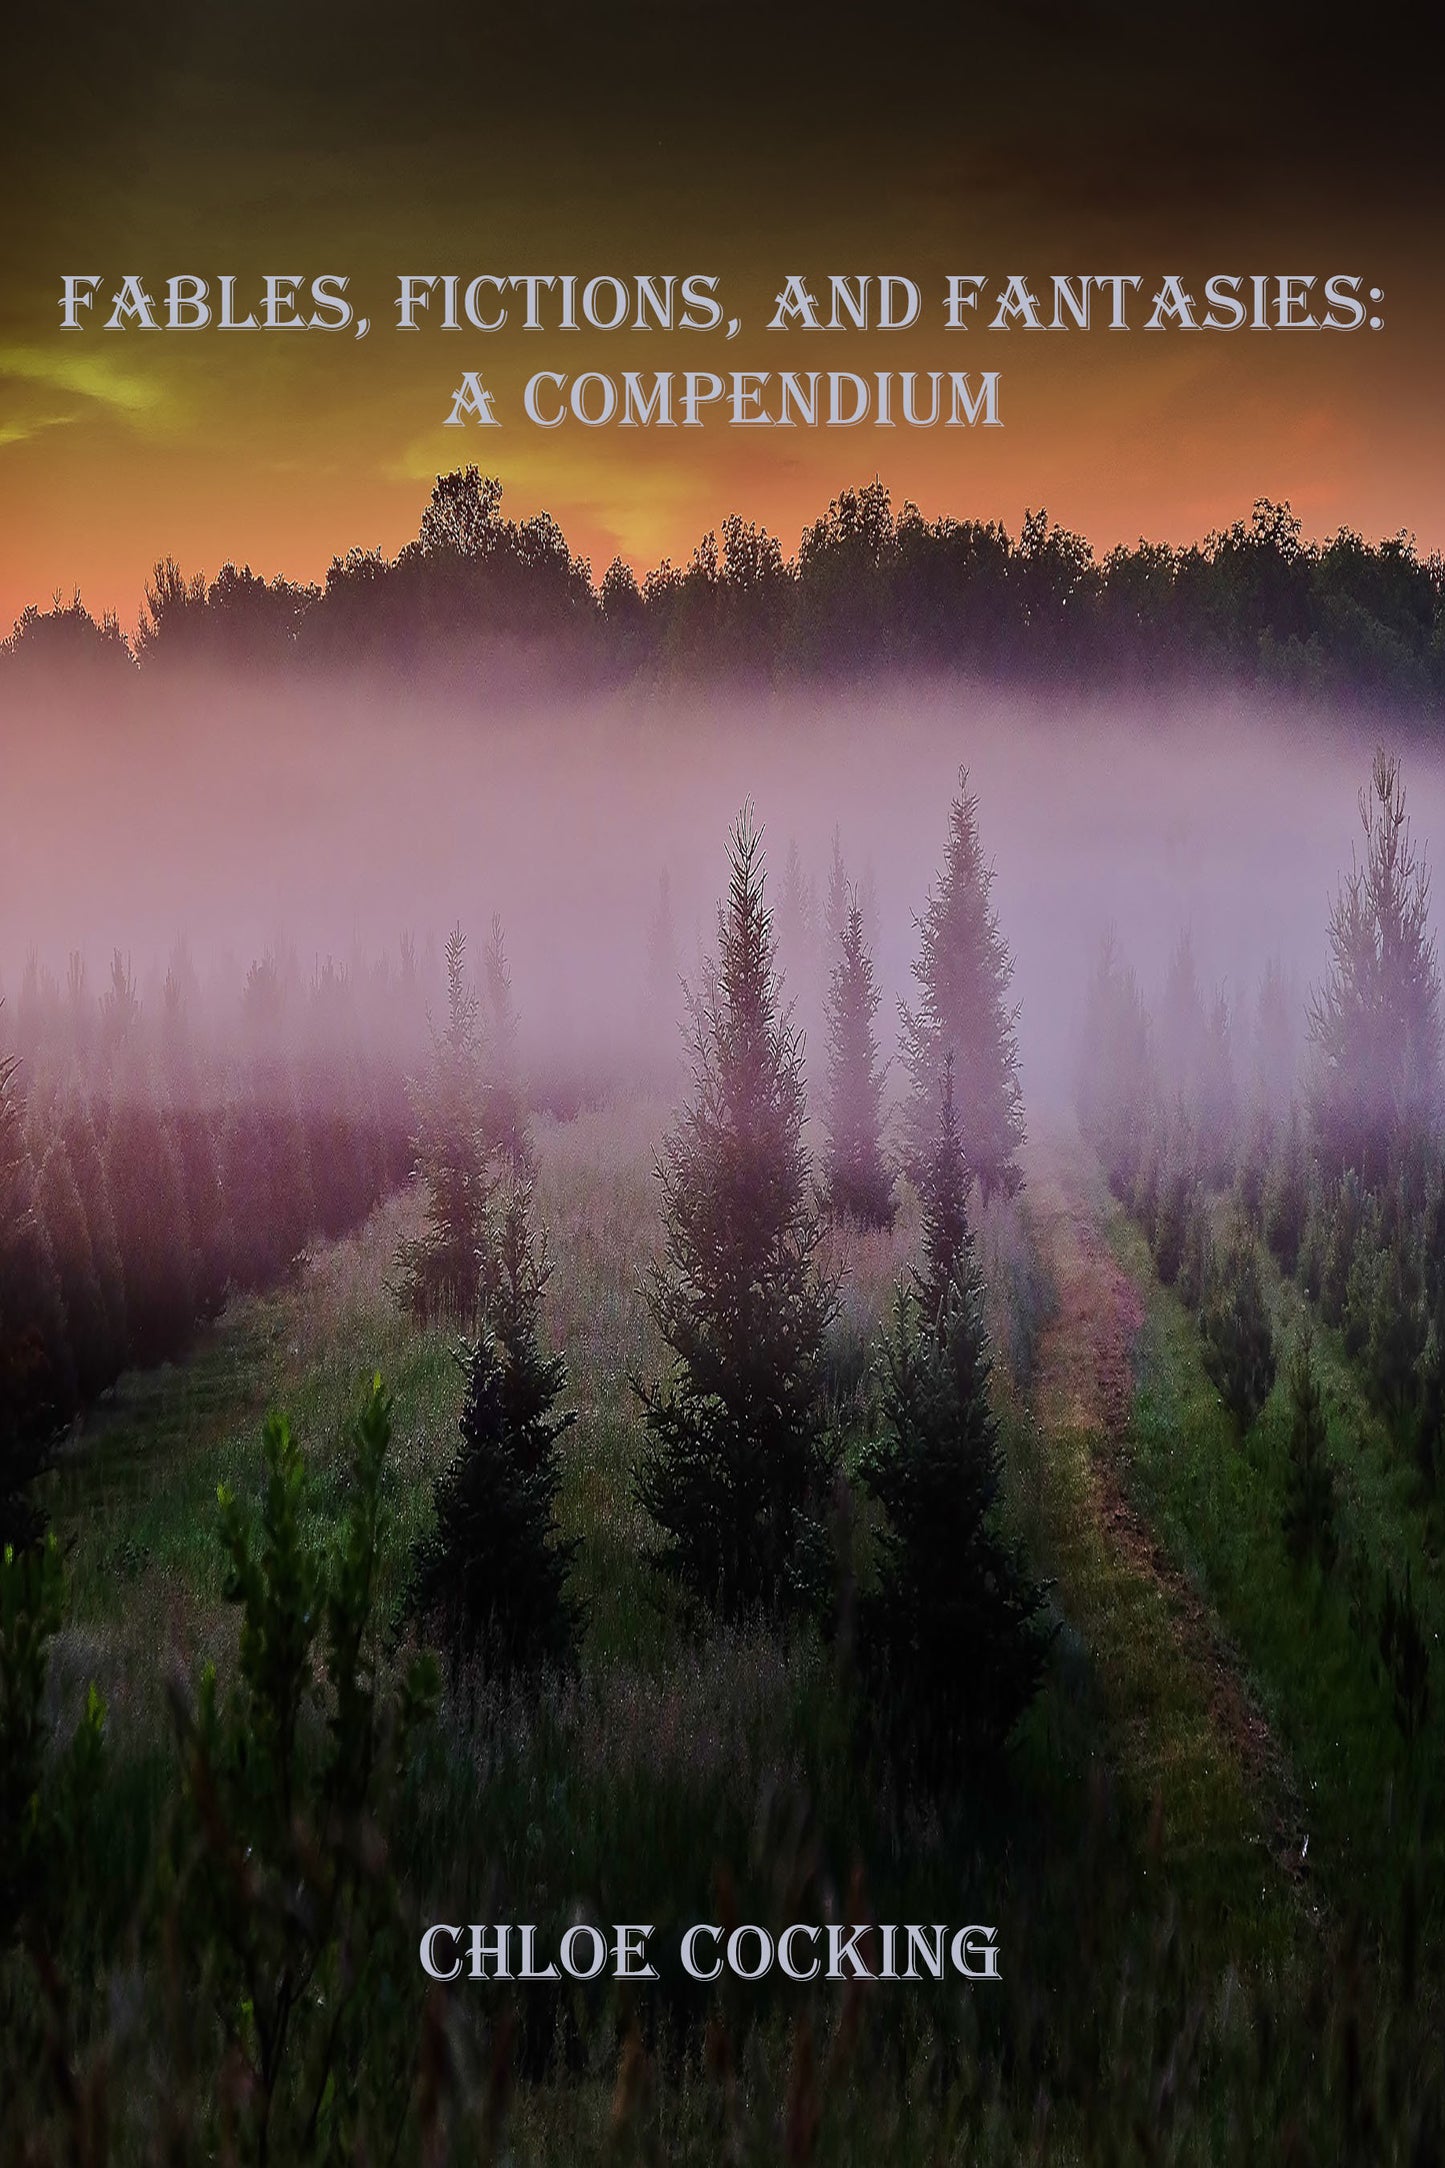 Fables, Fictions, and Fantasies:  A Compendium by Chloe Cocking (Ebook)